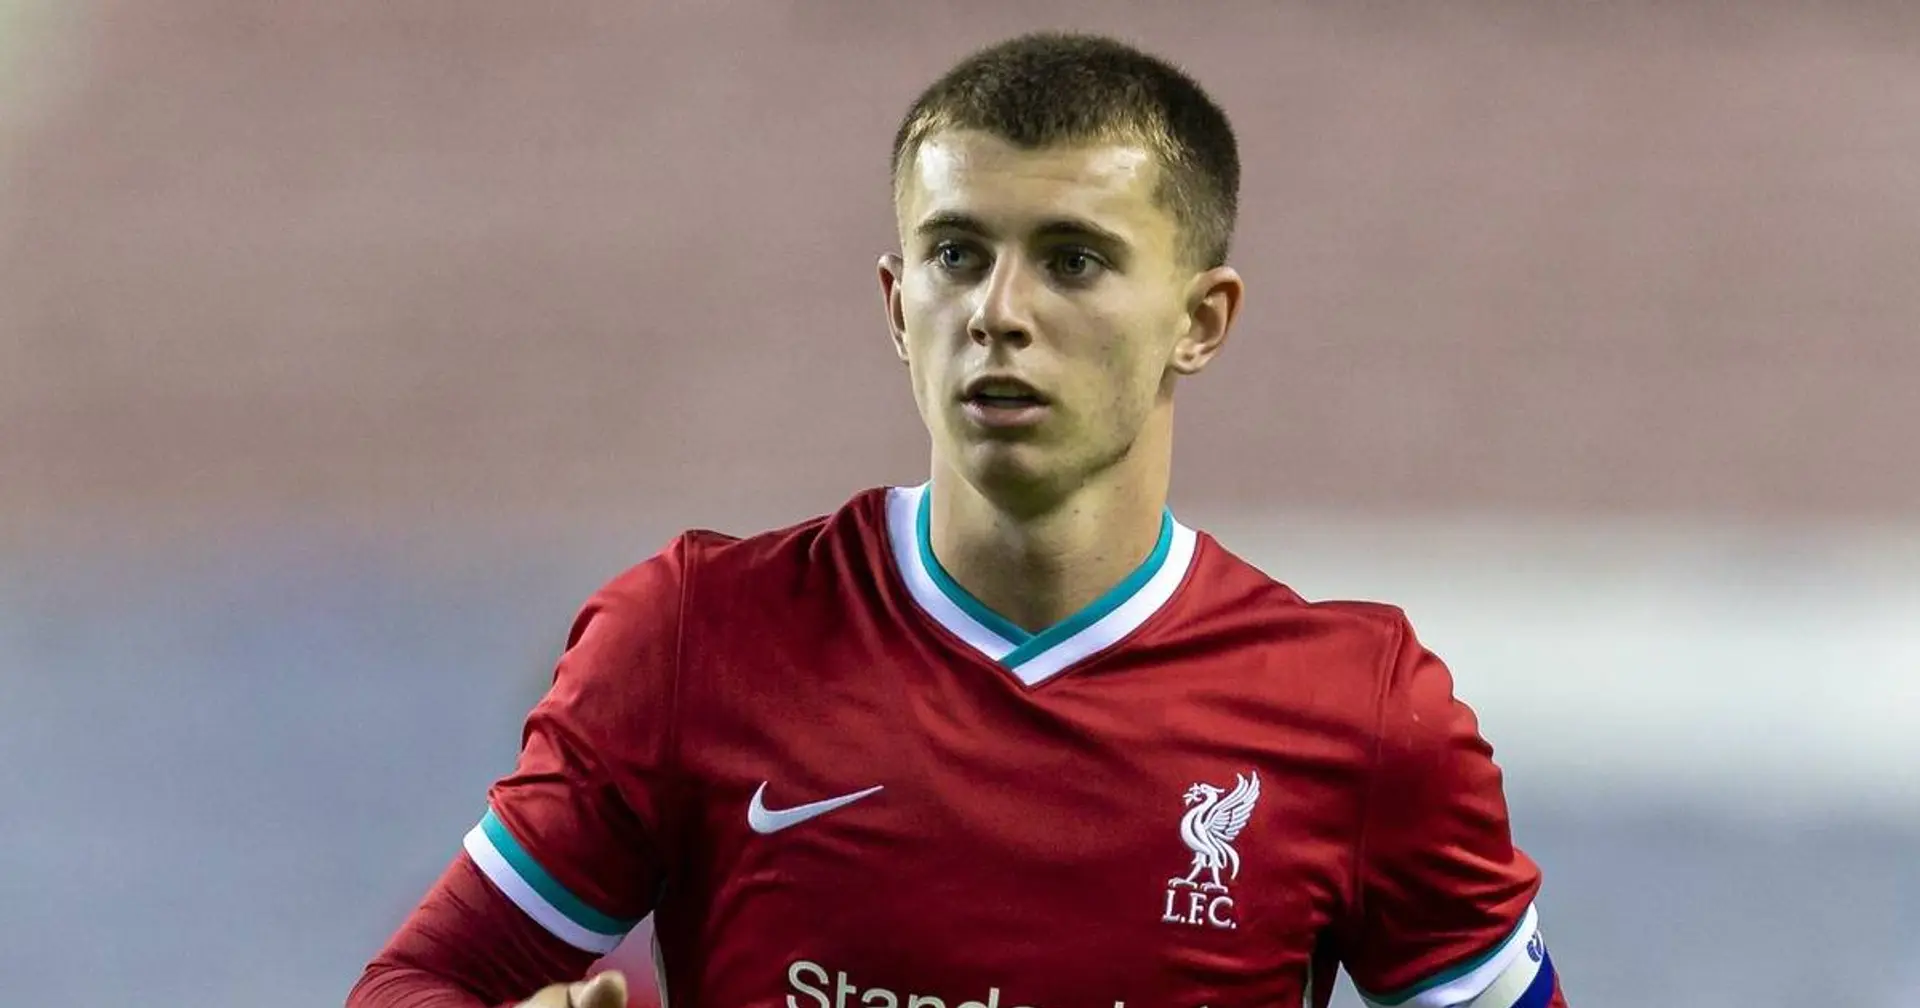 Ben Woodburn returns to Liverpool as disappointing Blackpool loan spell ends